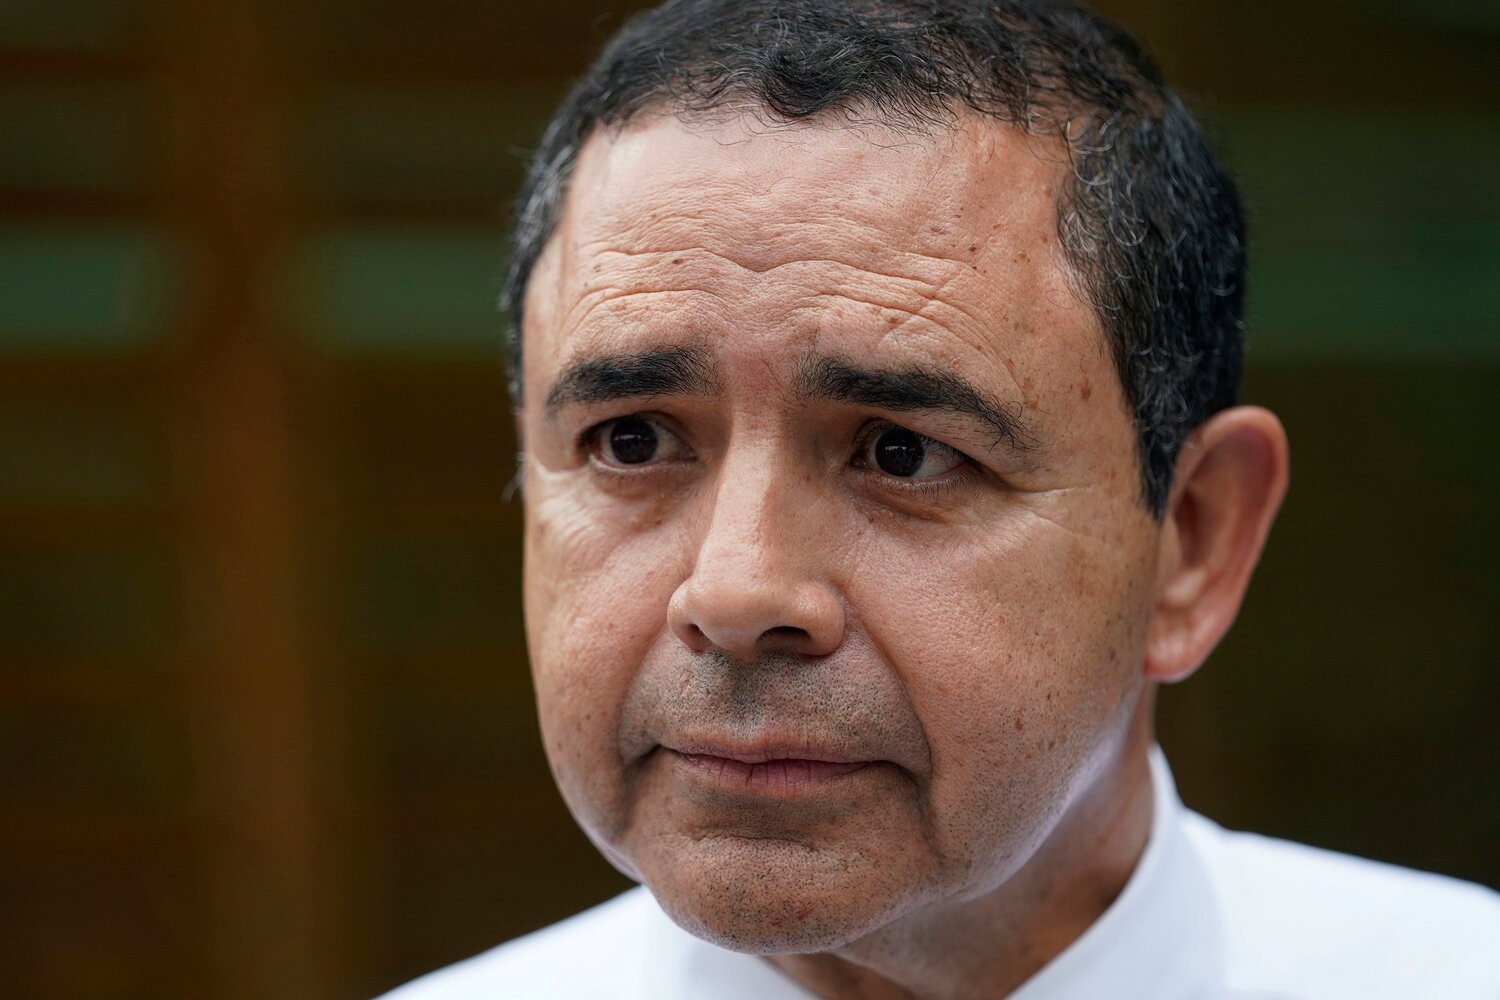 U.S. Rep. Henry Cuellar, D-Texas, talks to a member of the media during a campaign event in San Antonio, May 4, 2022. (AP Photo/Eric Gay, File)